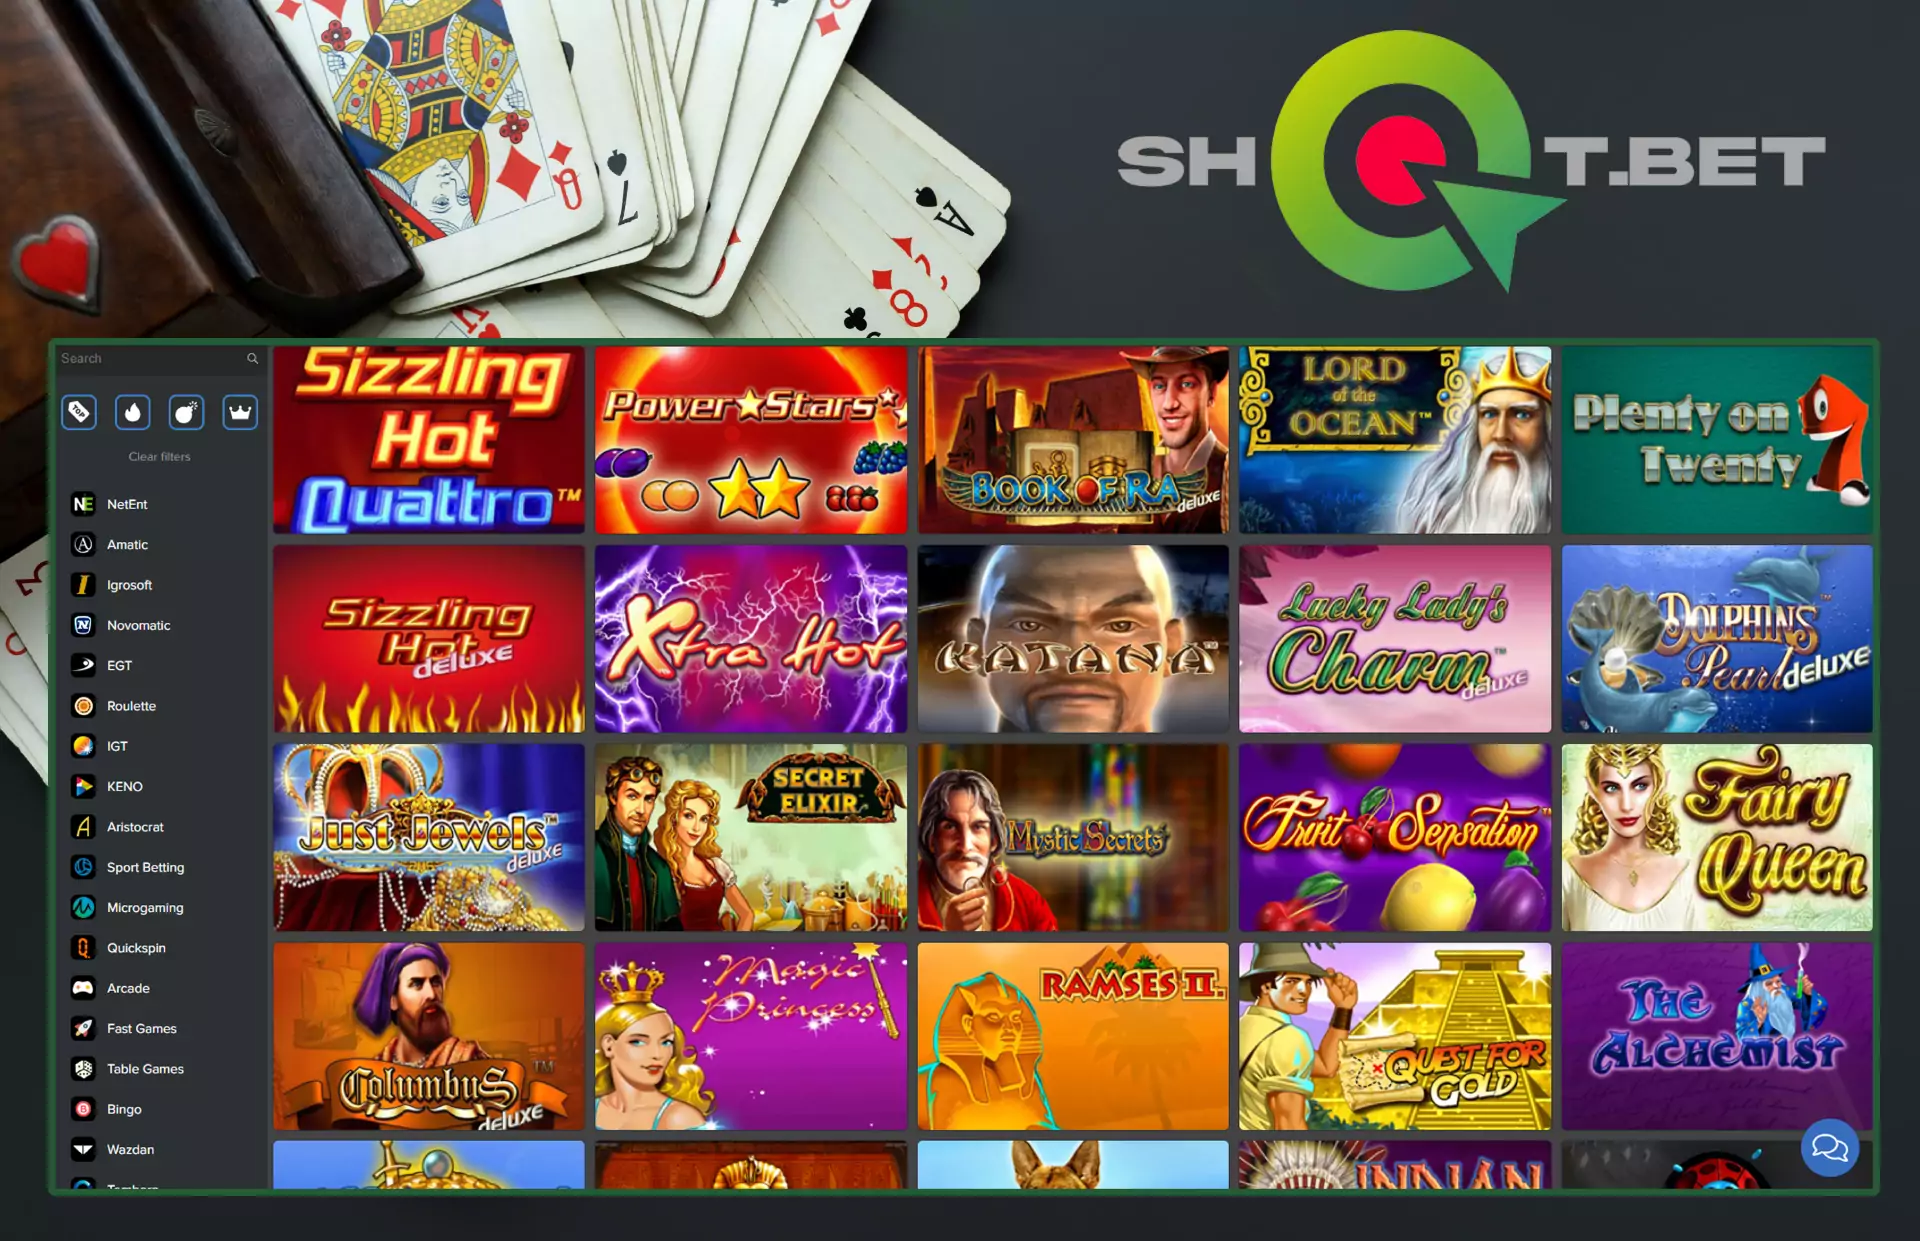 Play casino games in the special section on the site.